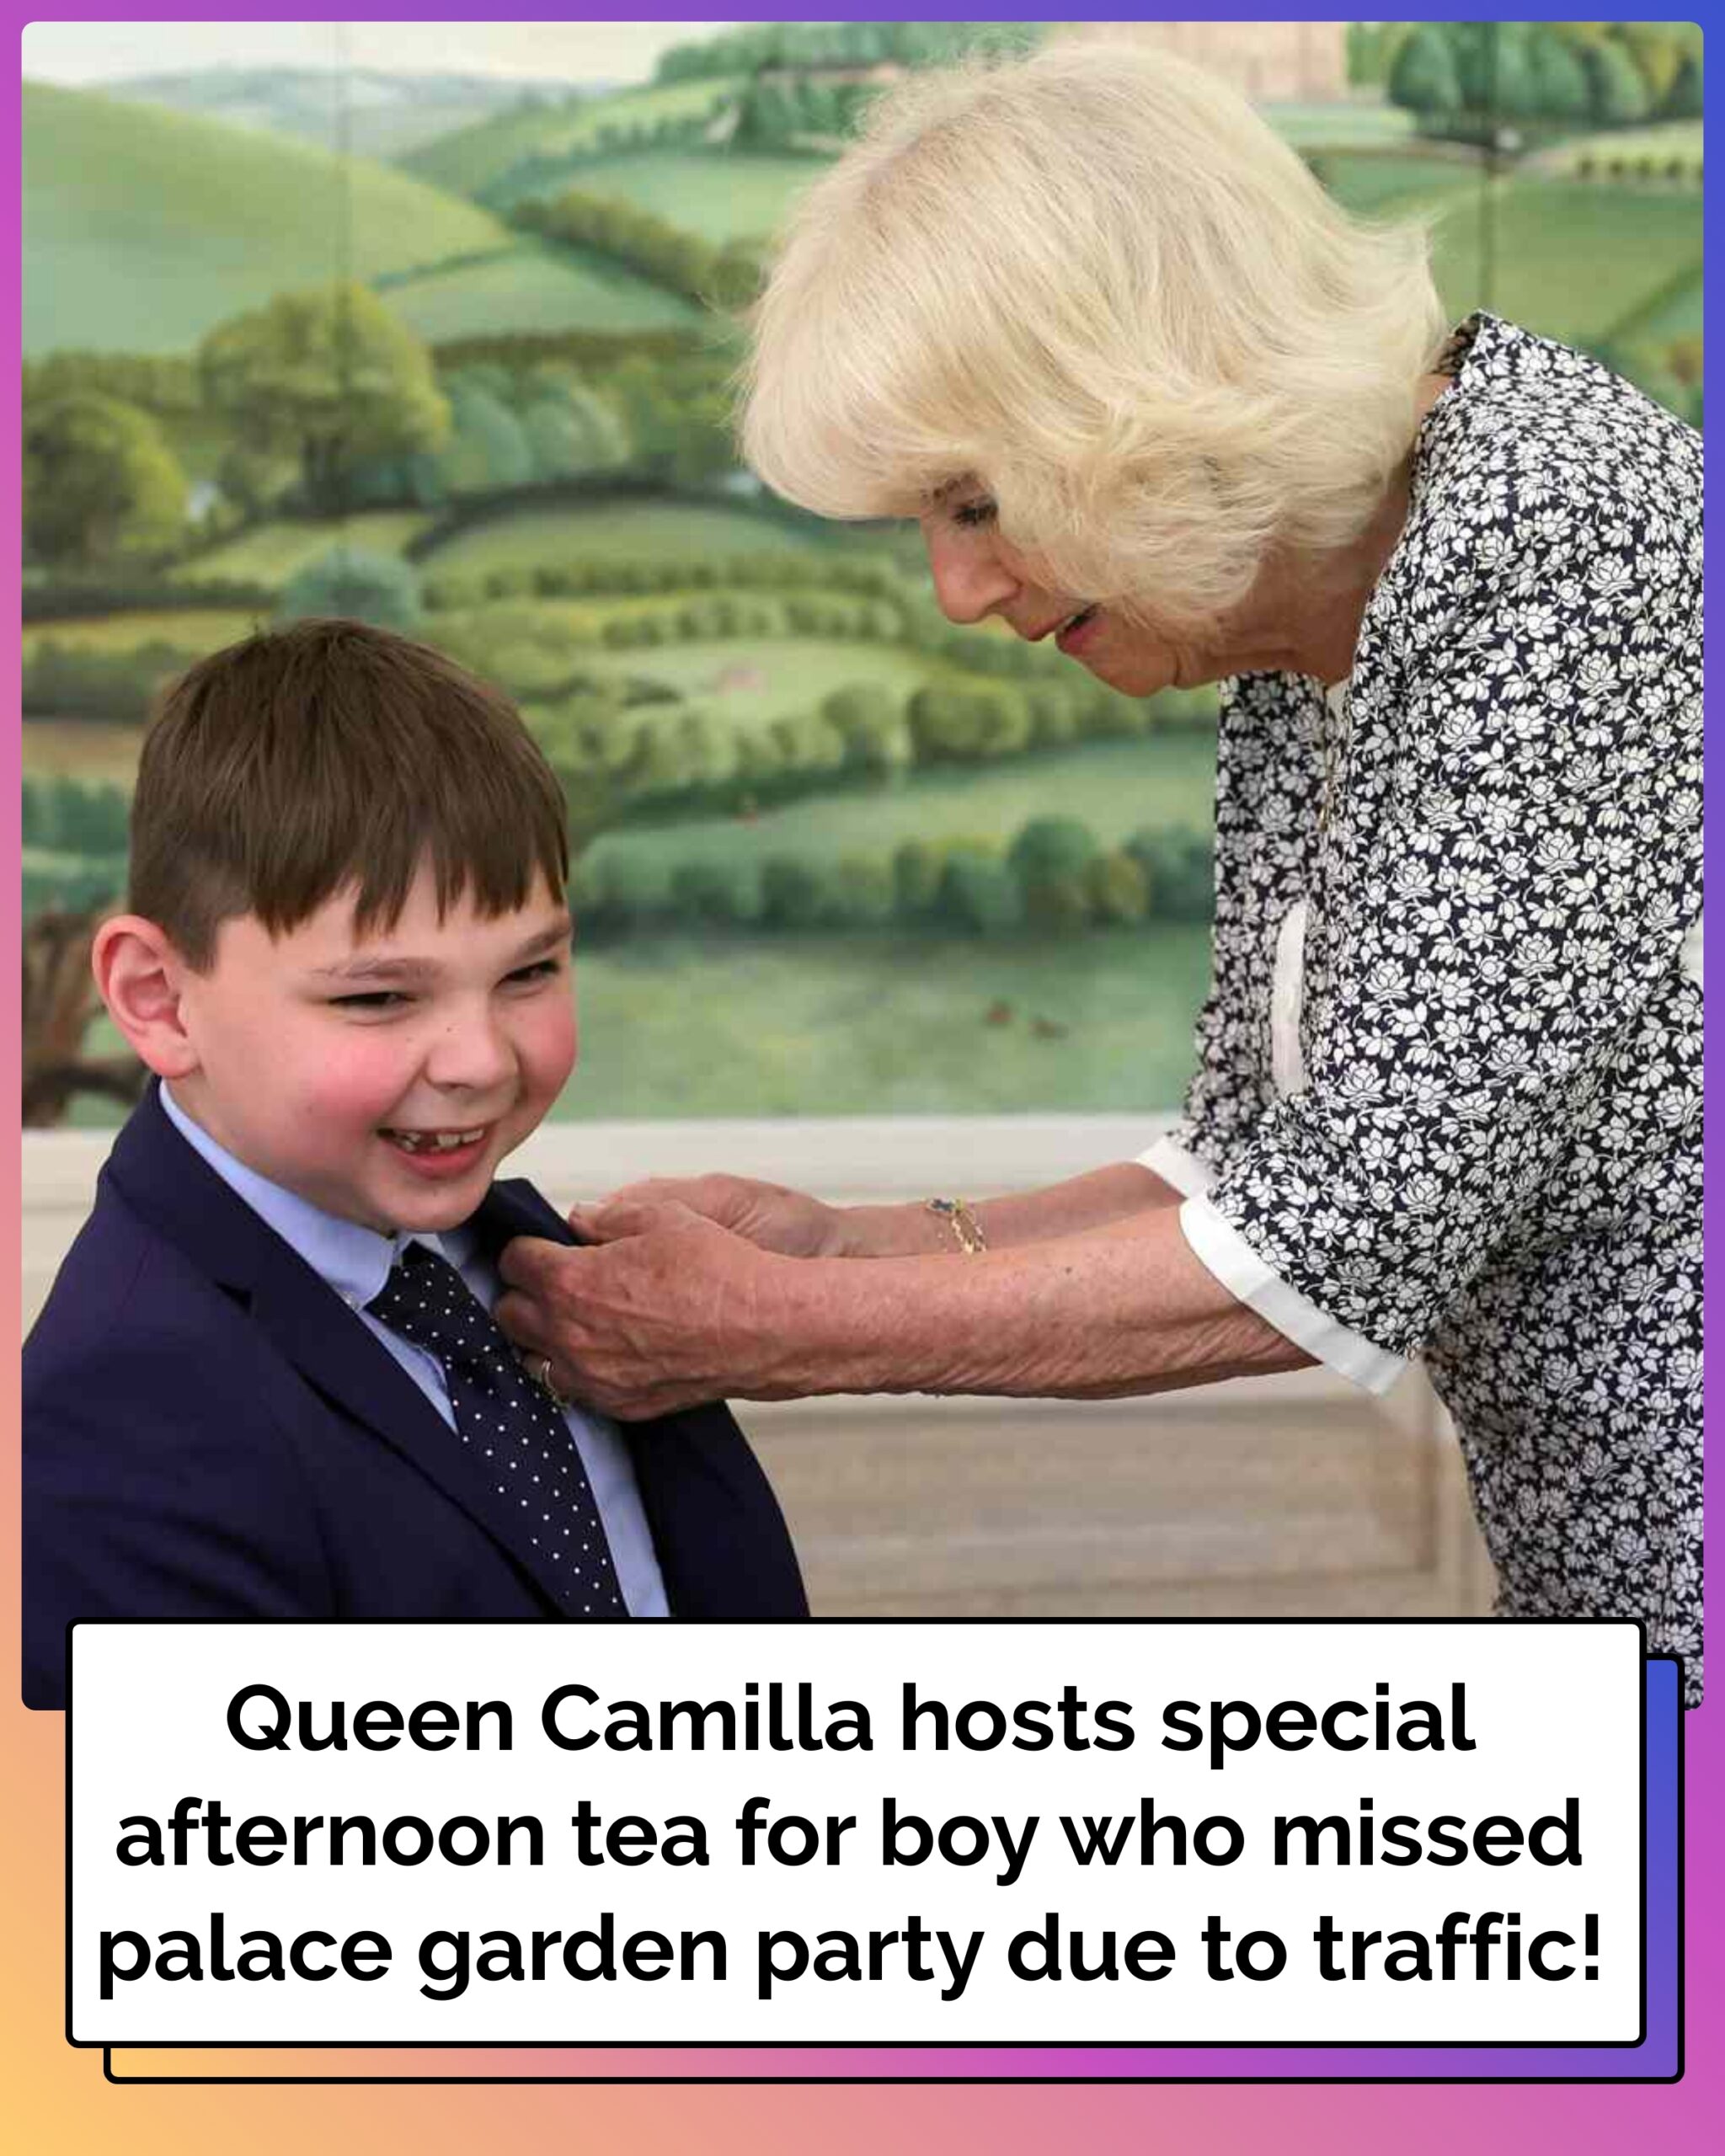 Queen Camilla Hosts Special Afternoon Tea for Boy Who Missed Palace Garden Party Due to Traffic